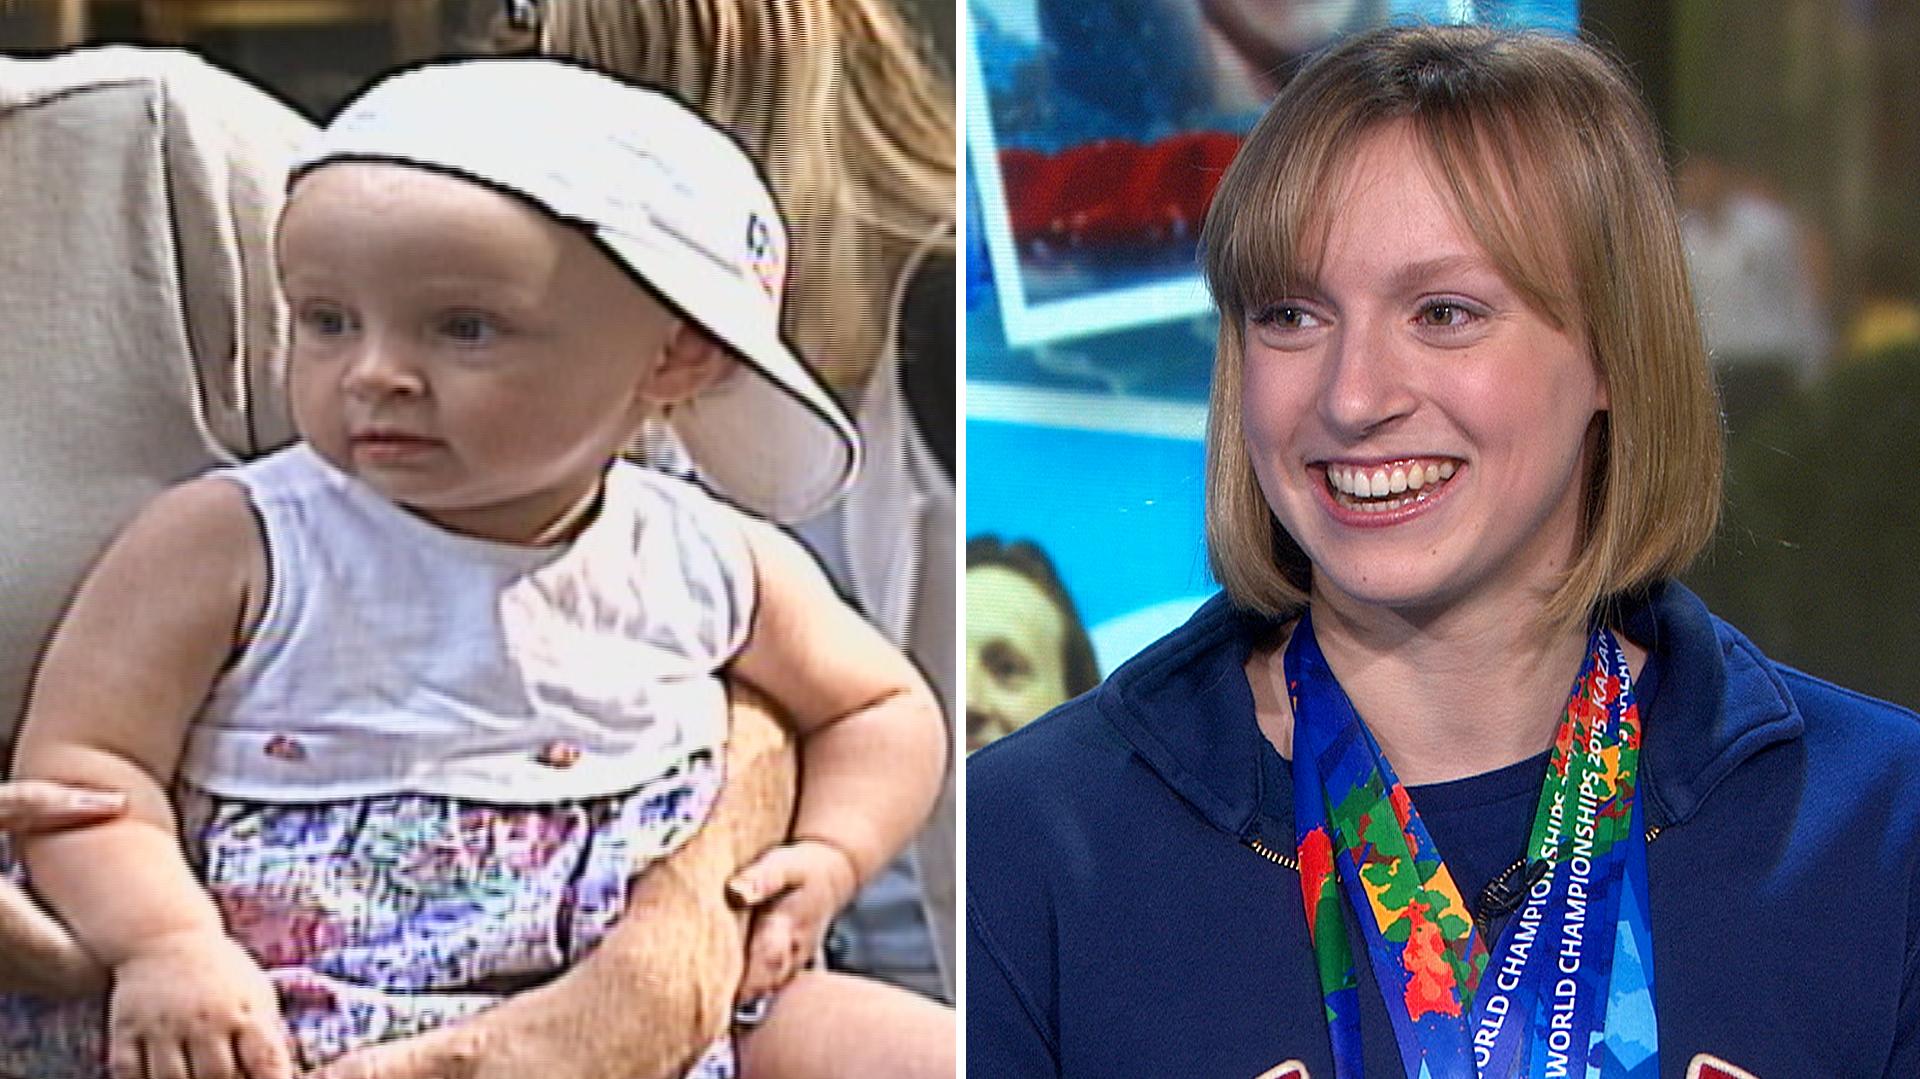 Olympic Swimmer Katie Ledecky Gives Advice To Girls Meets Fans On